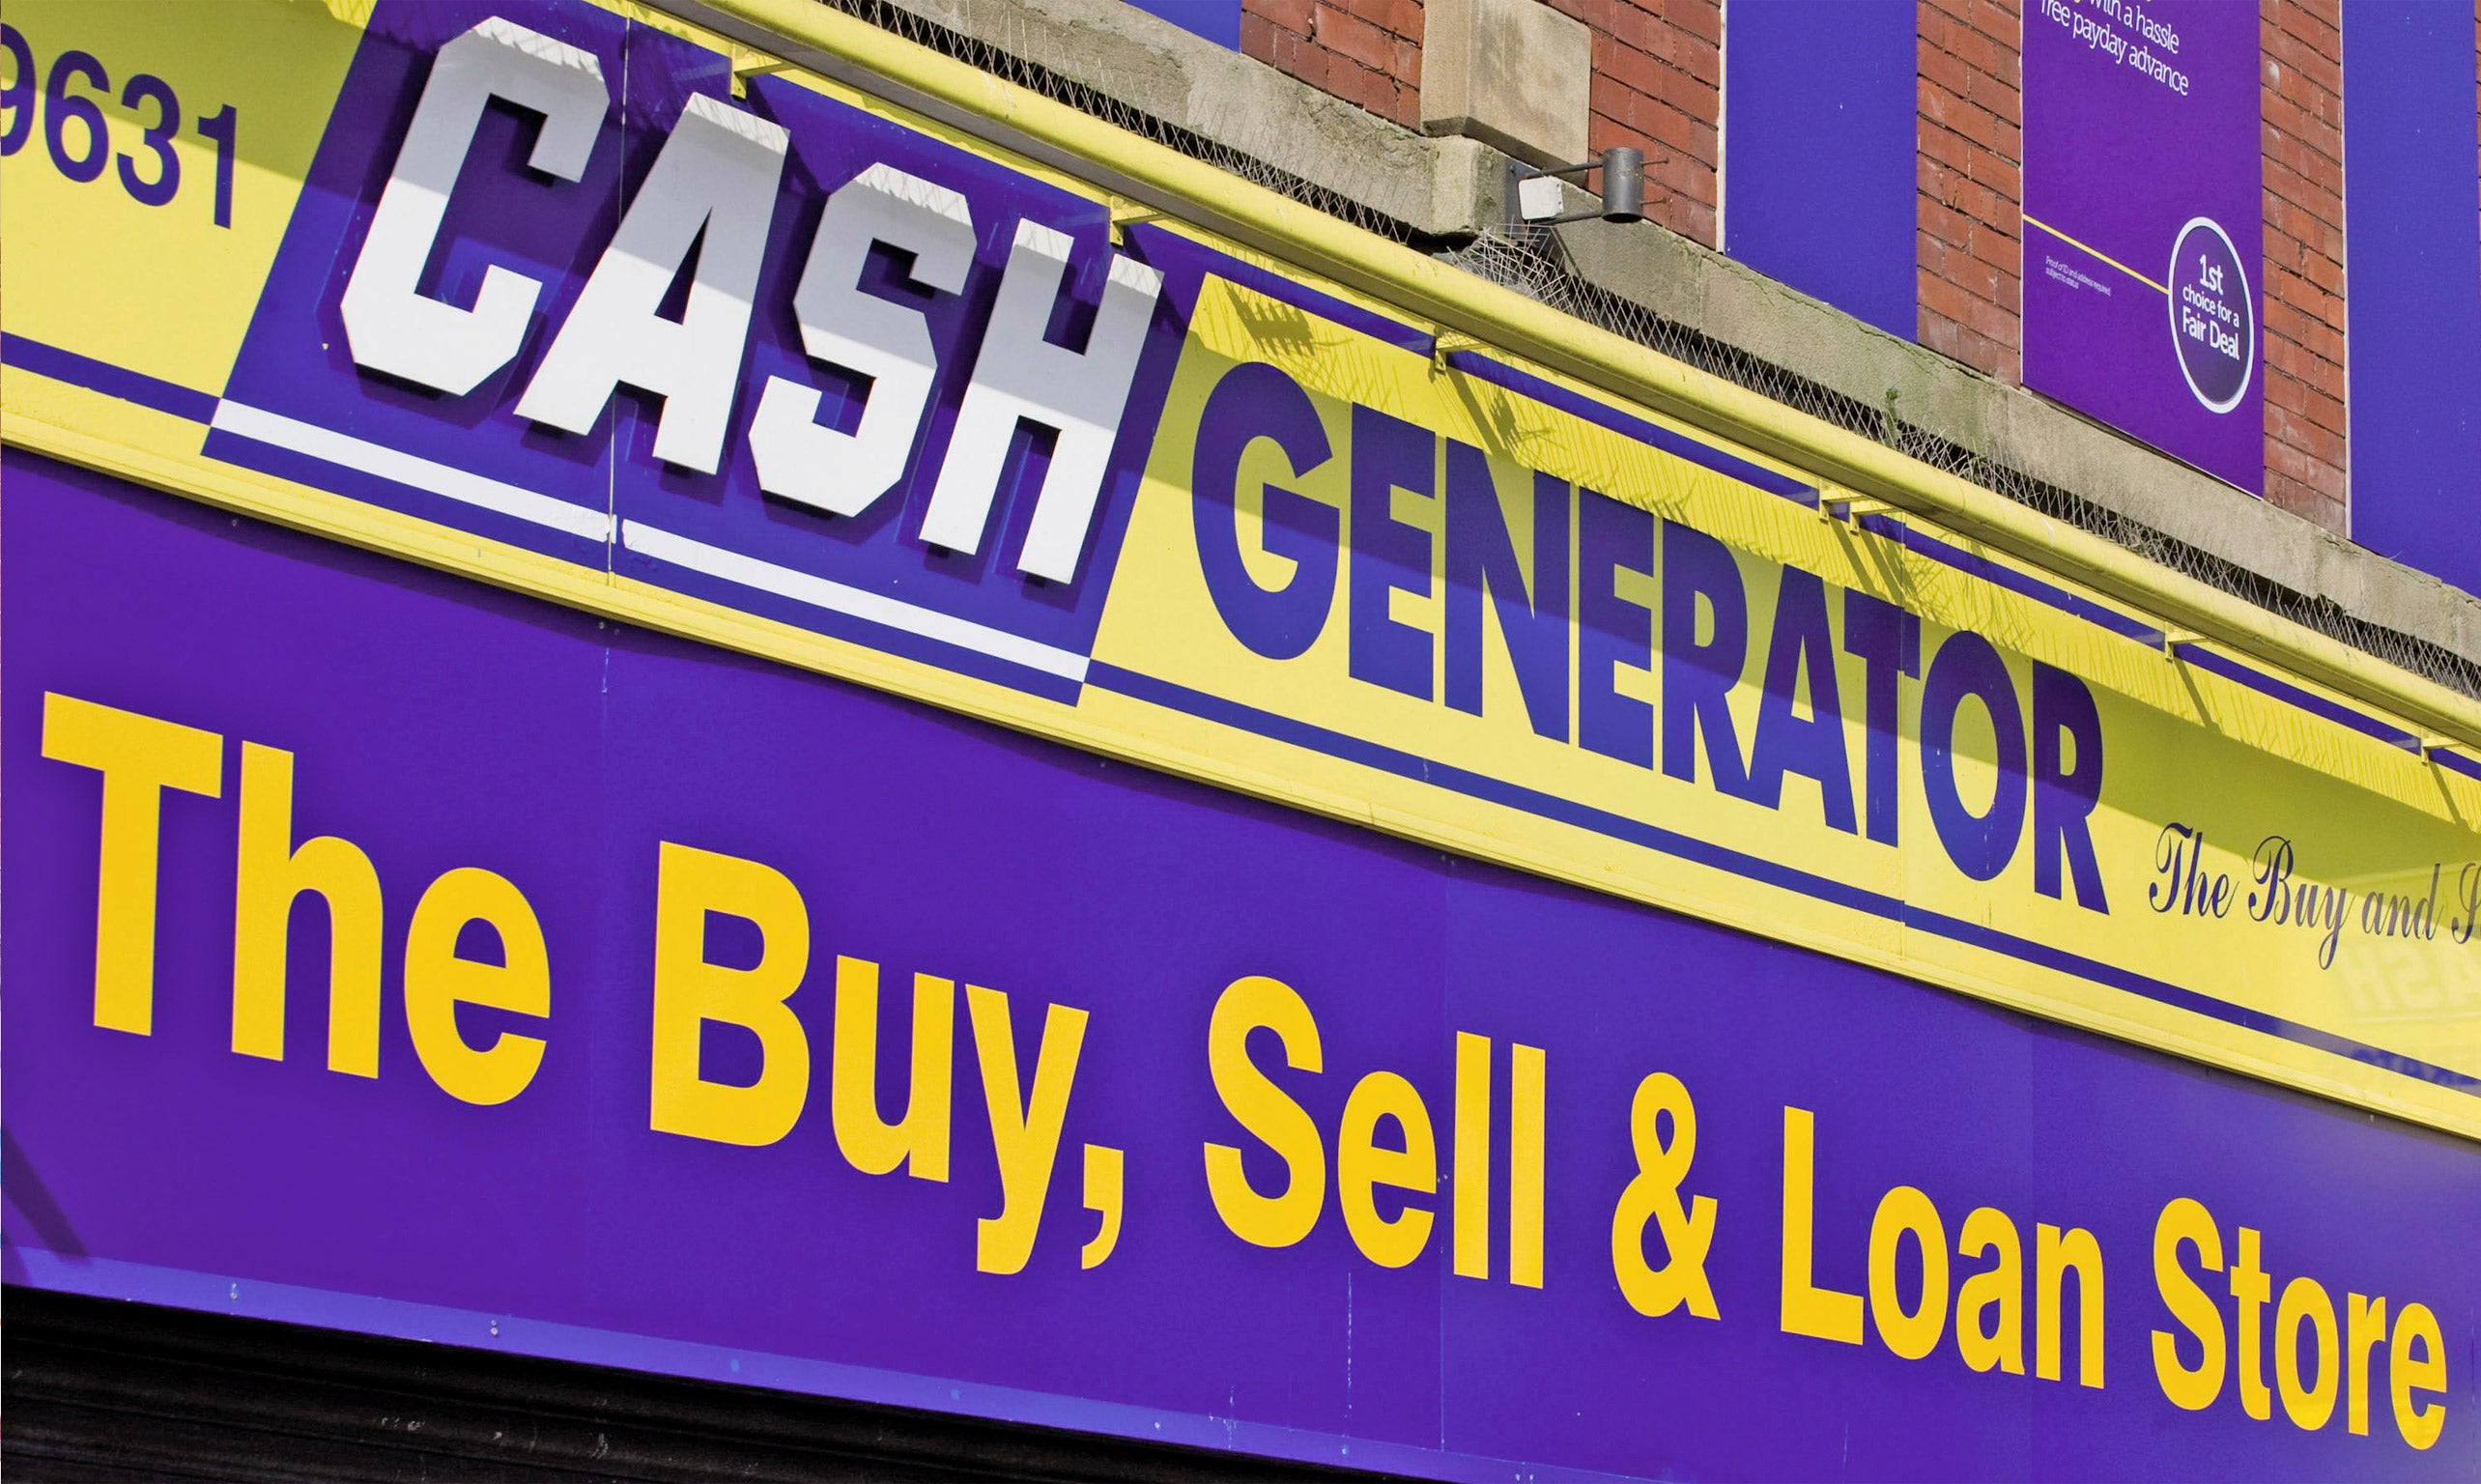 The OFT proposed to refer the payday lending market to the Competition Commission